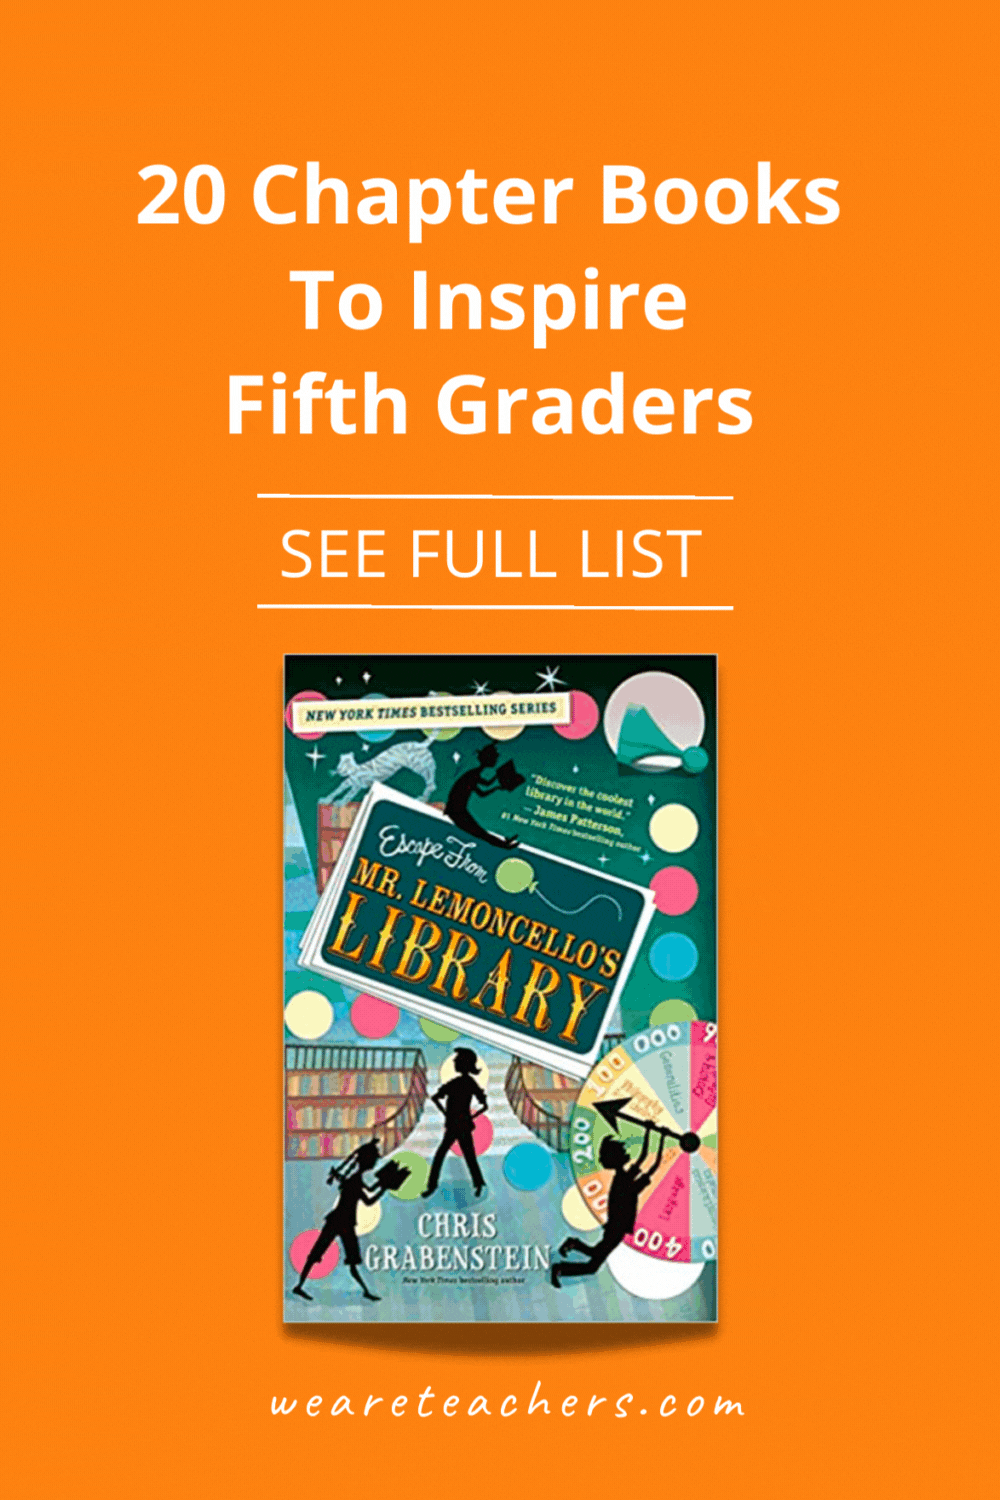 Check out this list of recommendations for wonderful chapter books for fifth graders to inspire and expand their minds.